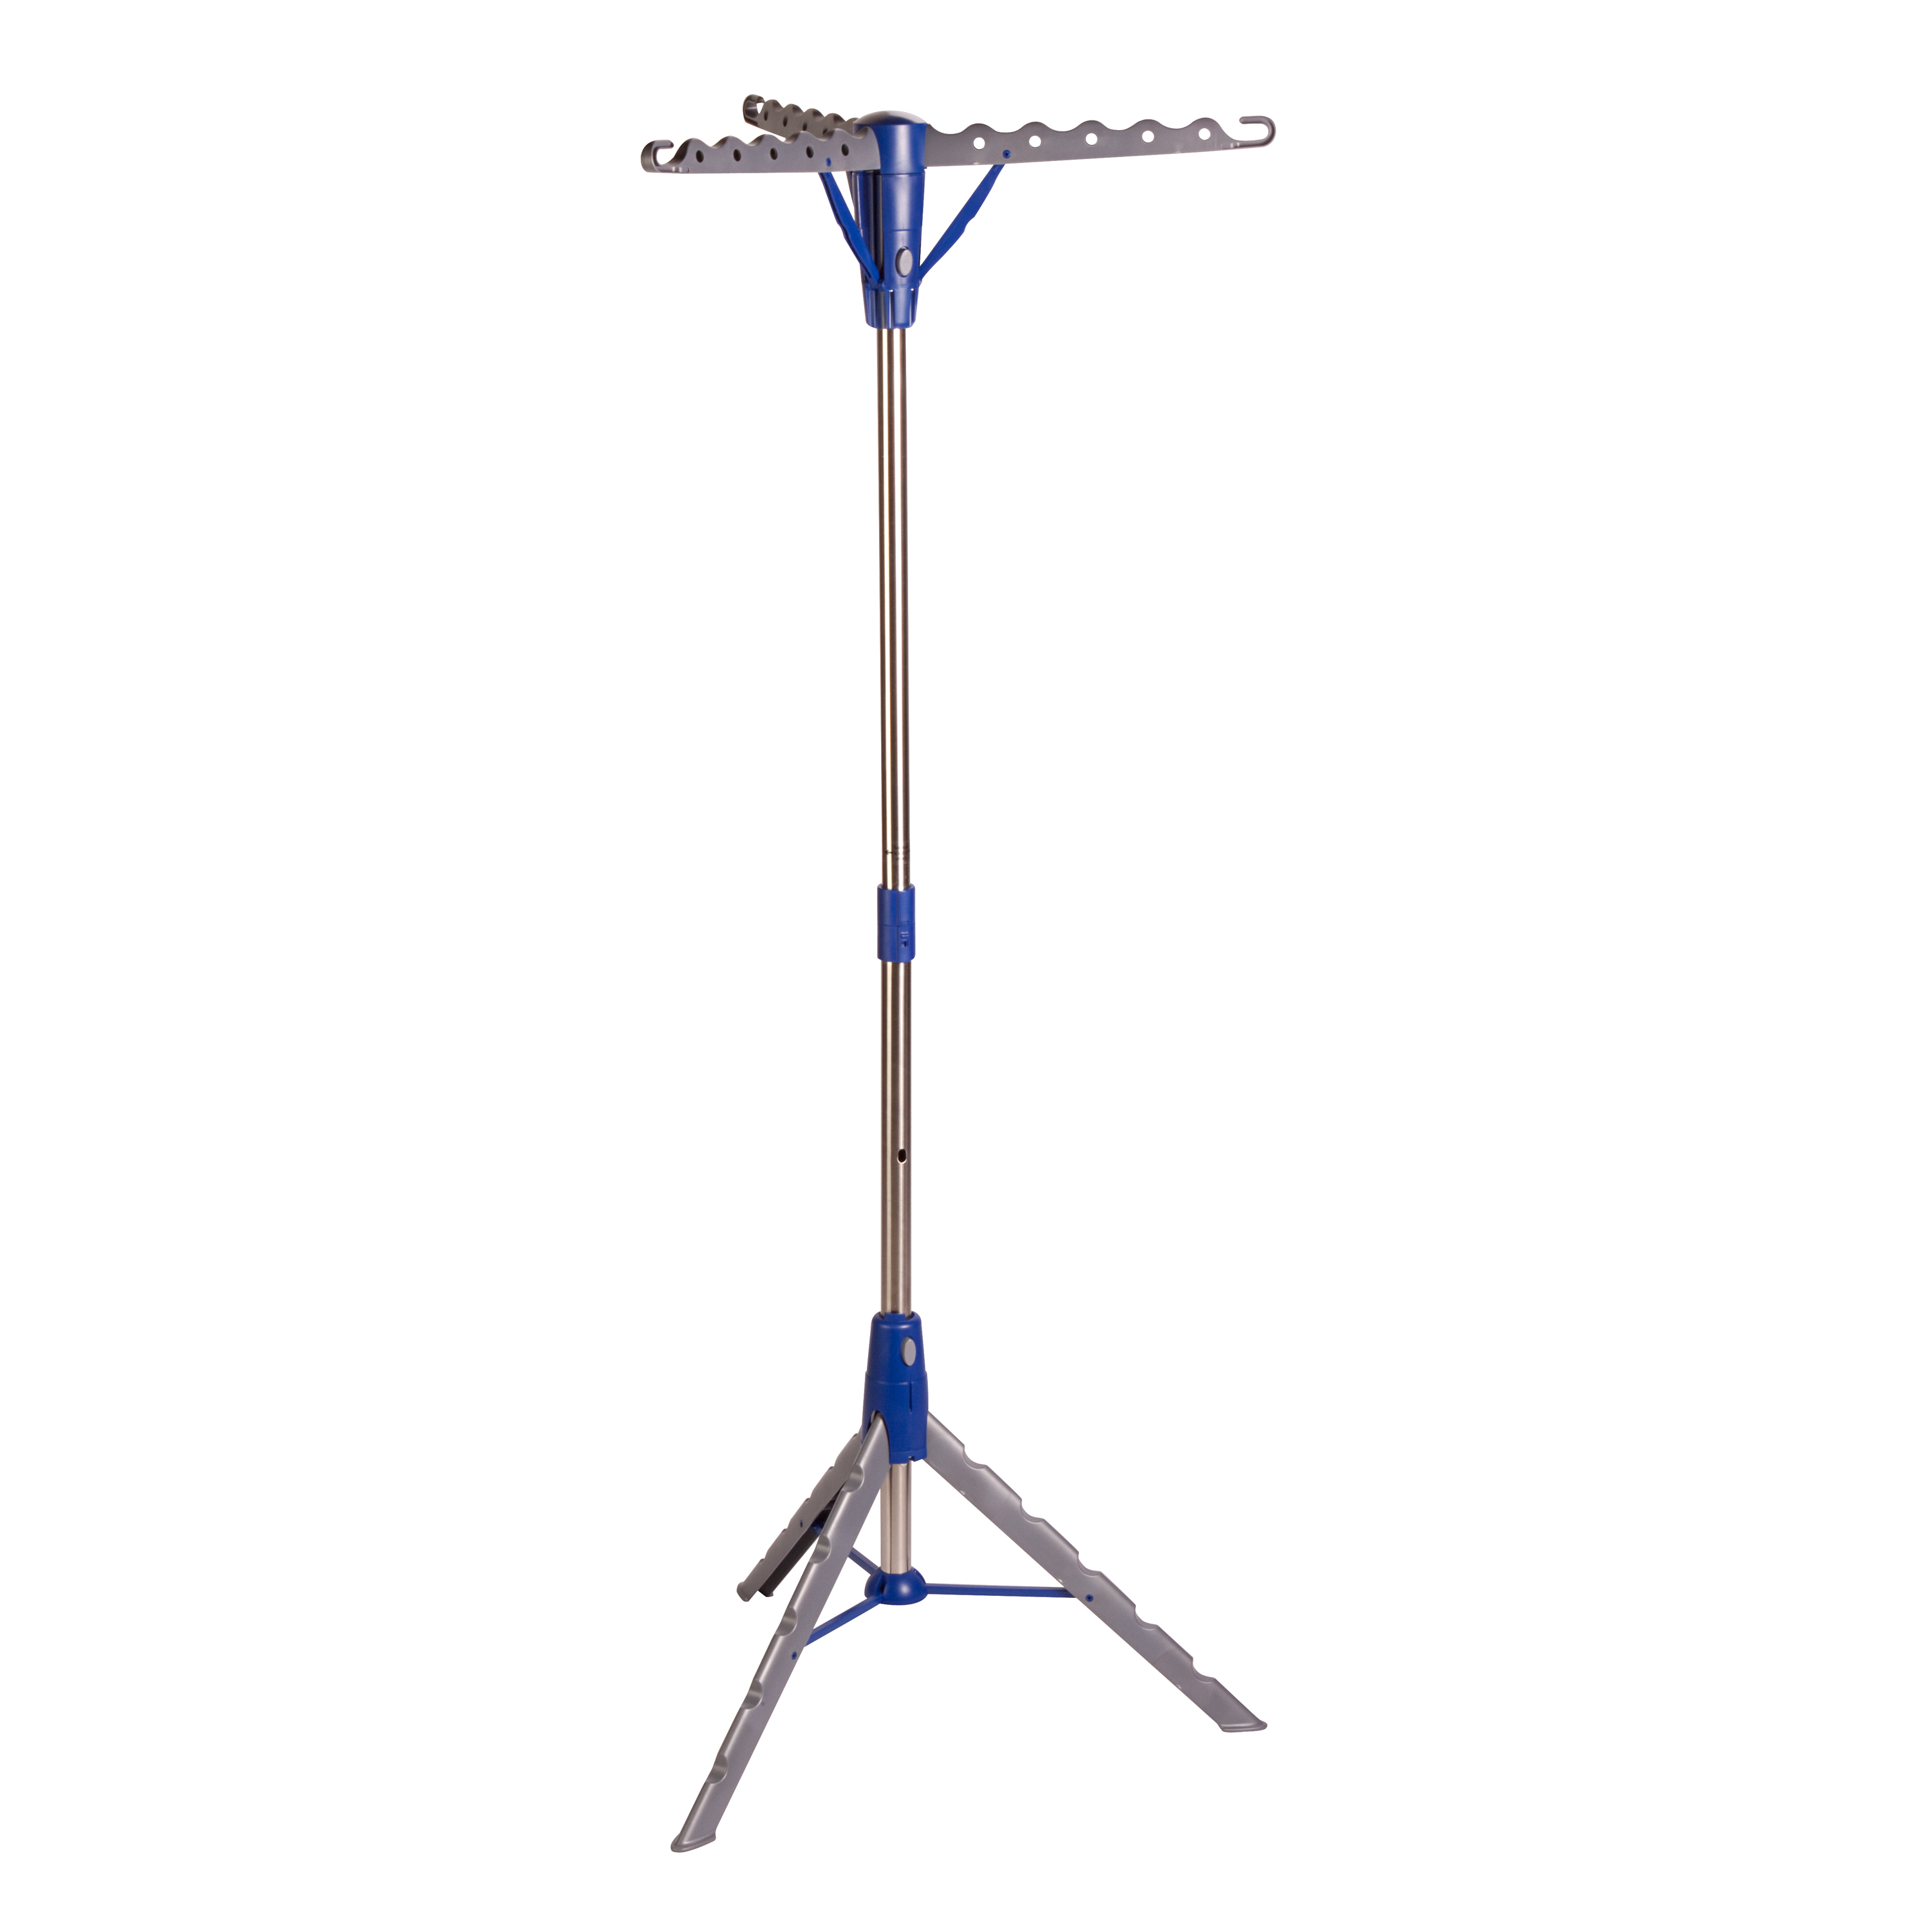 Honey-Can-Do Collapsible Steel Freestanding Tripod Clothes Drying Rack, Chrome/Blue - image 2 of 5